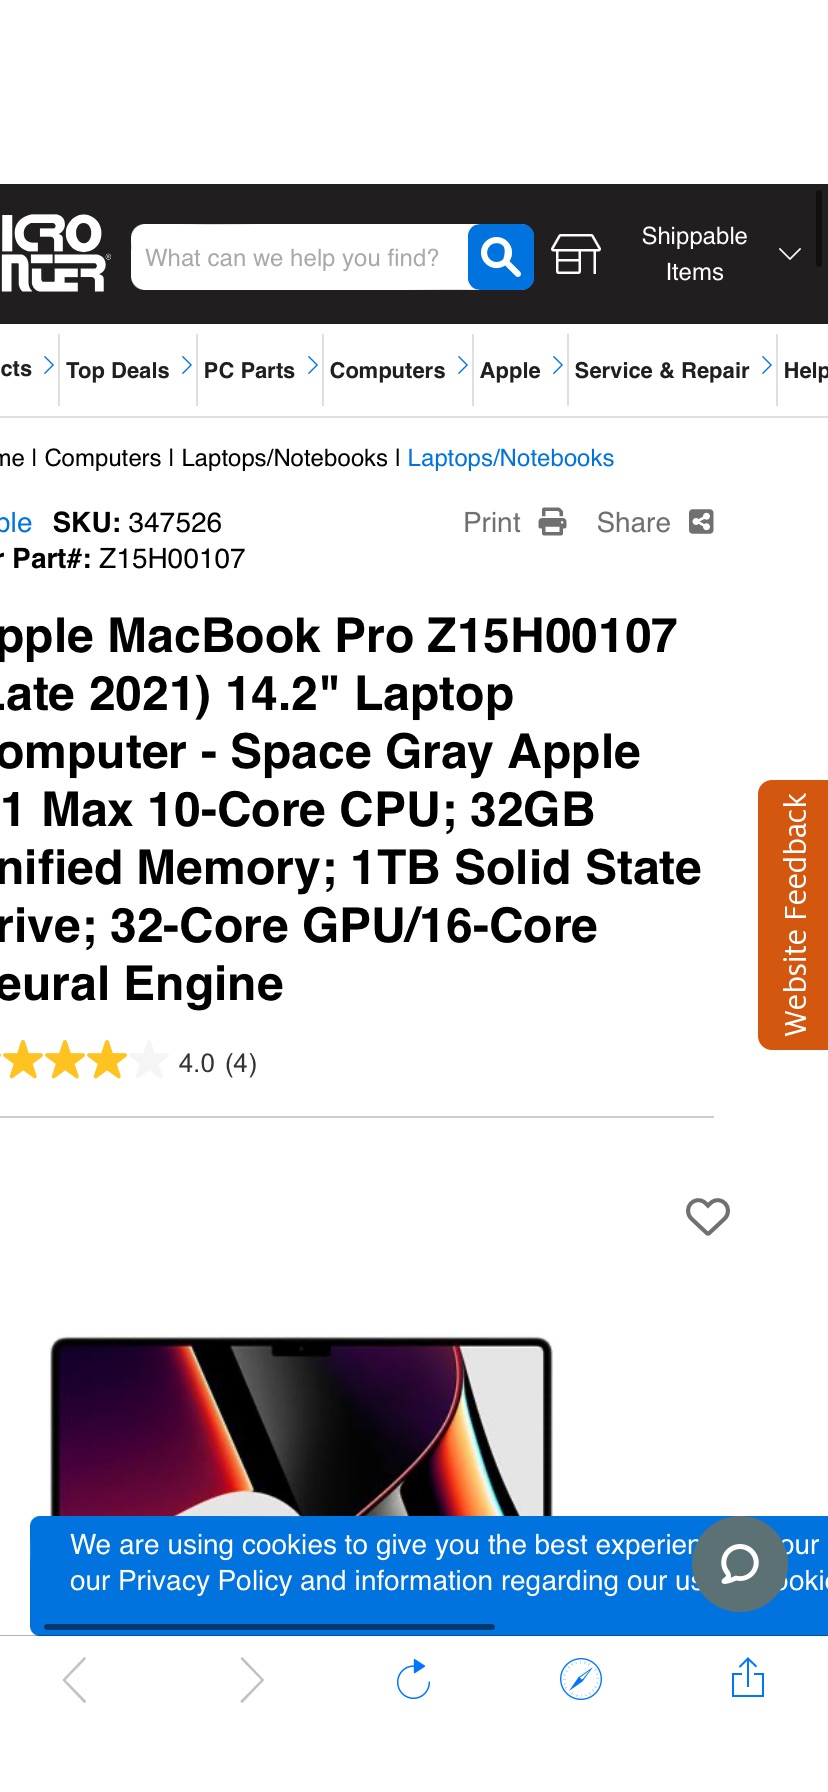 Apple MacBook Pro Z15H00107 (Late 2021) 14.2" Laptop Computer - Space Gray; Apple M1 Max 10-Core CPU; 32GB Unified - Micro Center